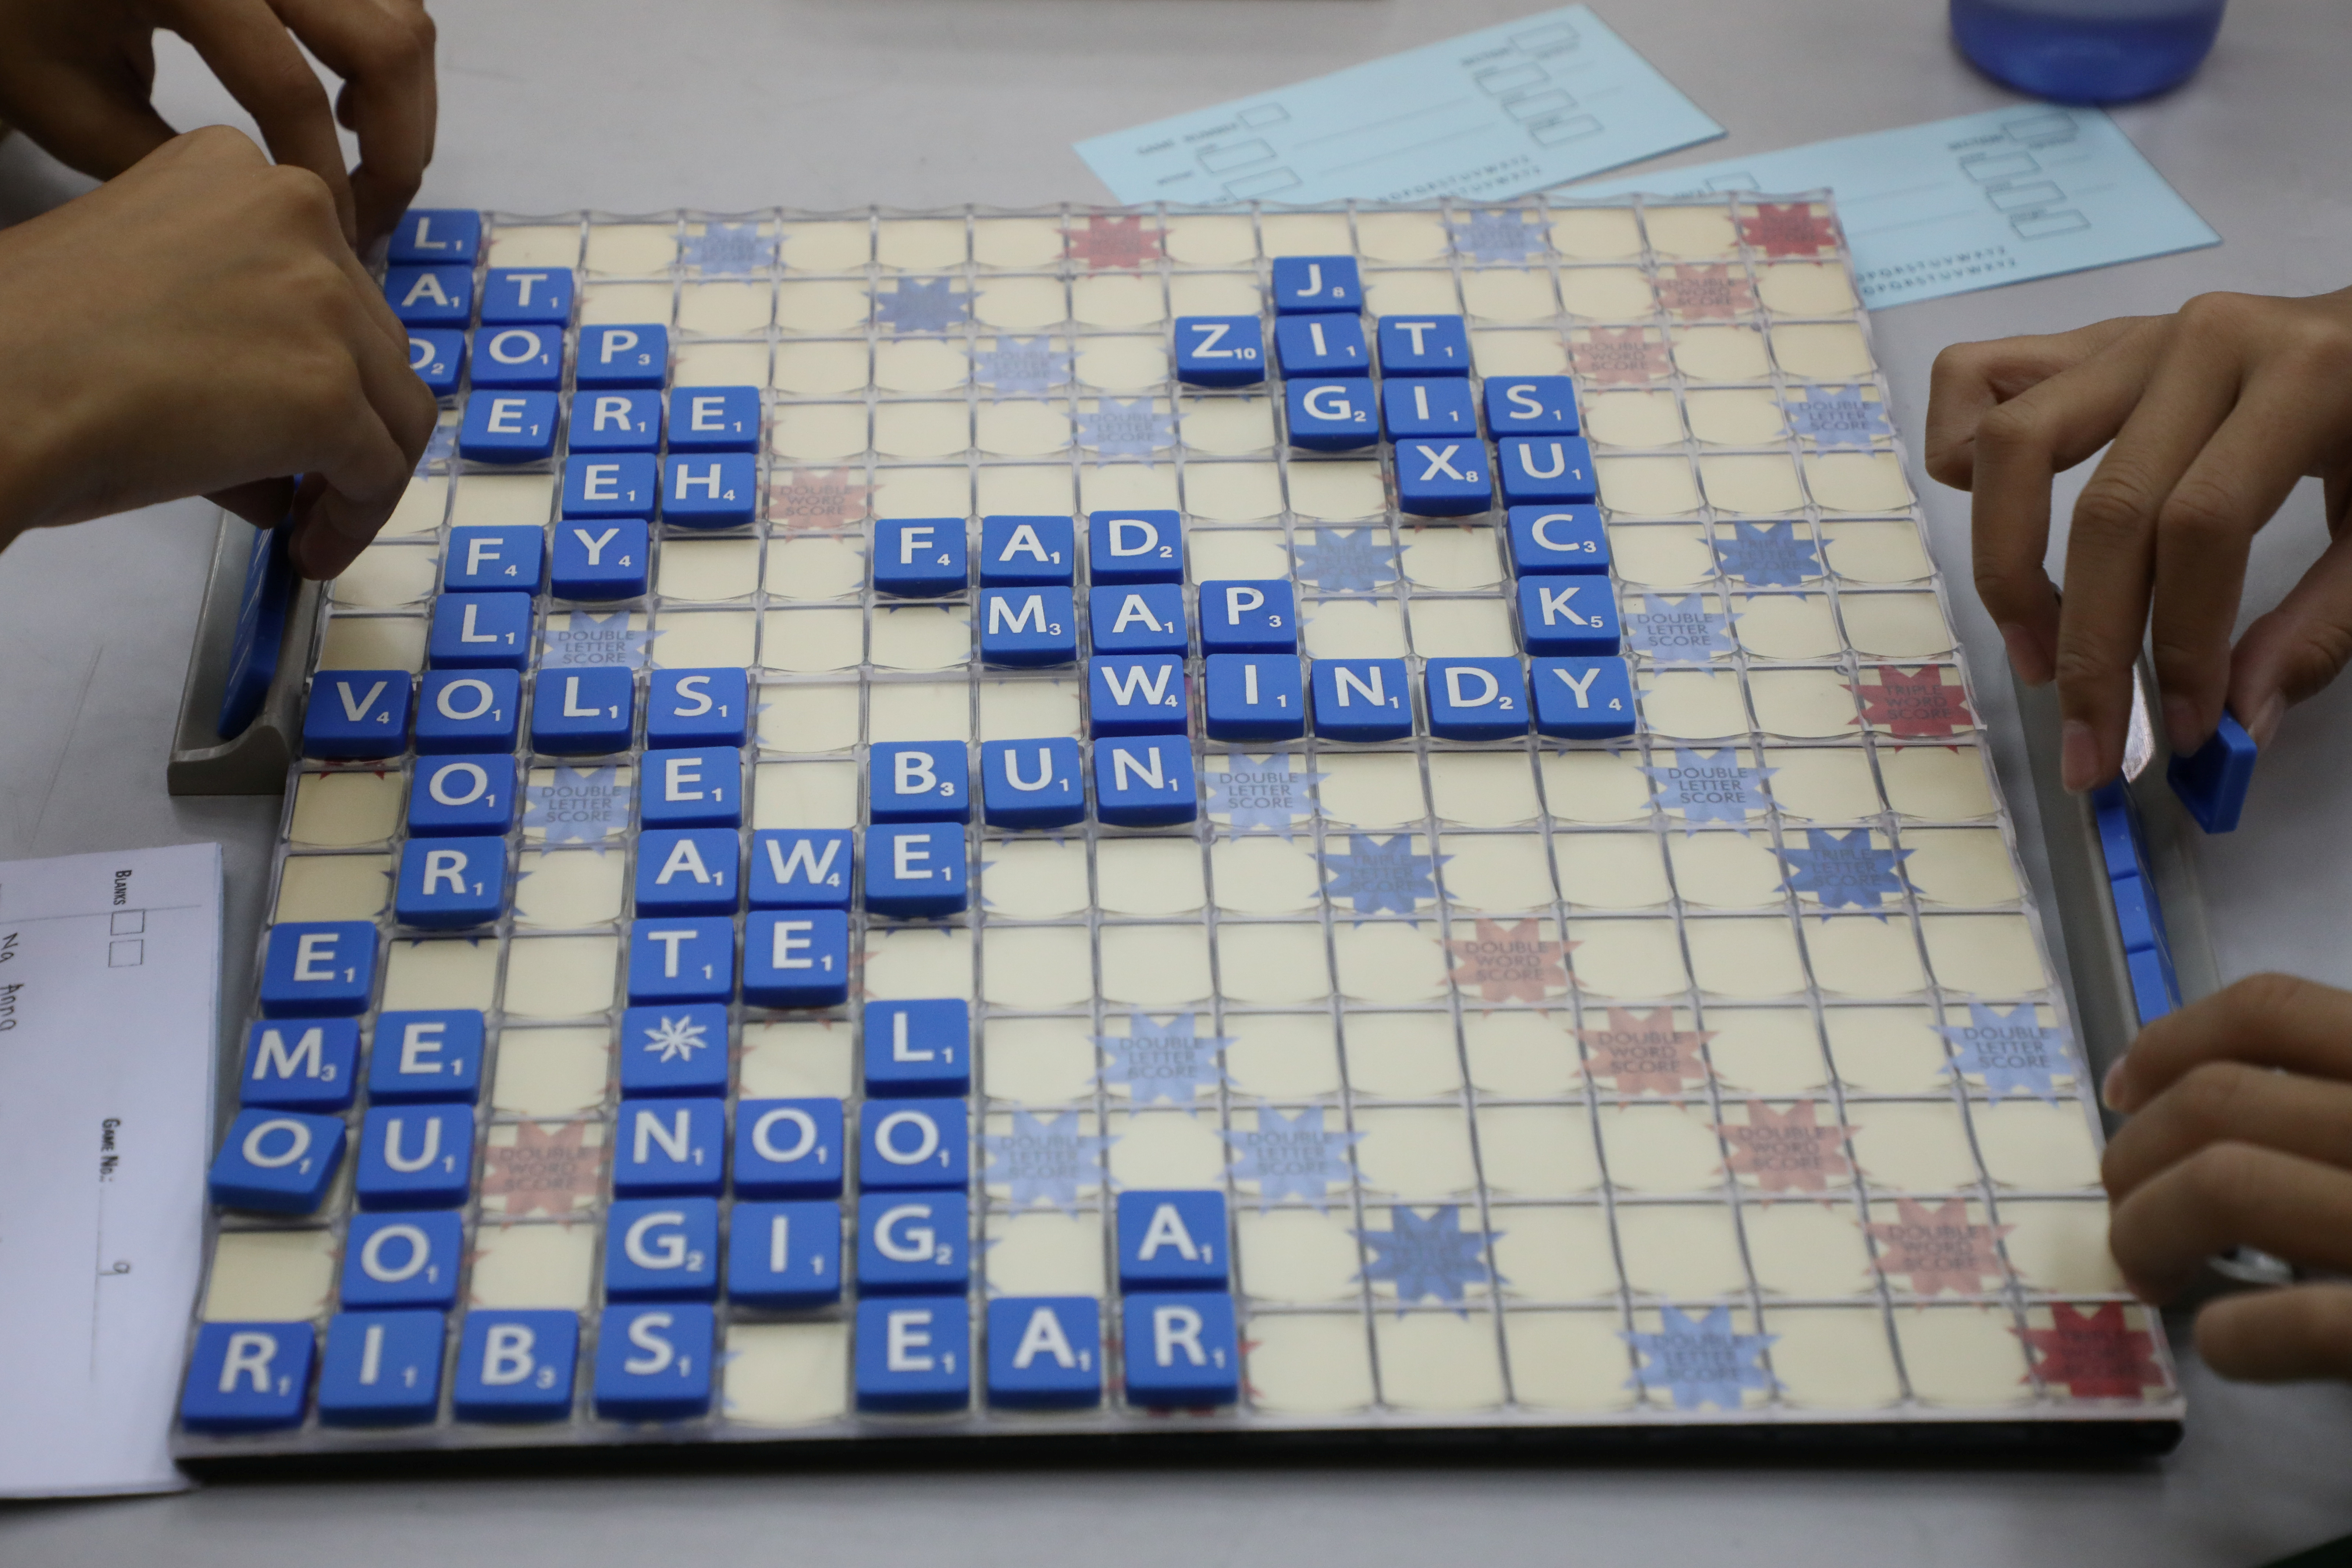 Players play Scrabble at the WESPA Youth Cup 2019 in Kuala Lumpur, Malaysia on November 30, 2019.  Picture taken on November 30, 2019.  REUTERS/Lim Huey Teng